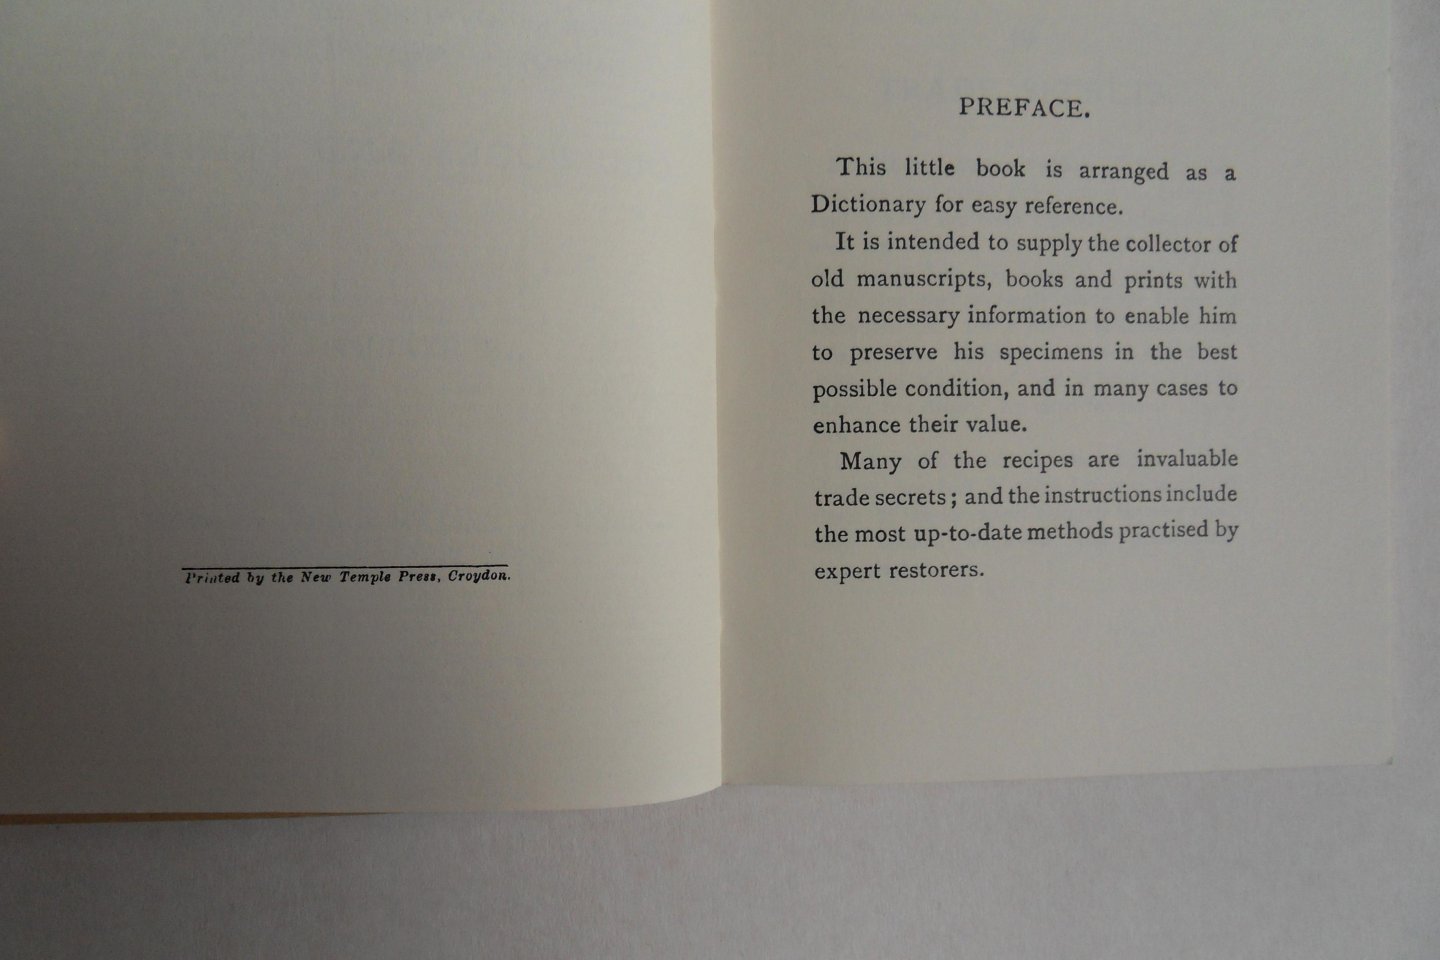 Expert, An. - The Book of Trade Secrets. - Receipts and Instructions for Renovating, Repairing, Improving and Preserving Old Books and Prints.